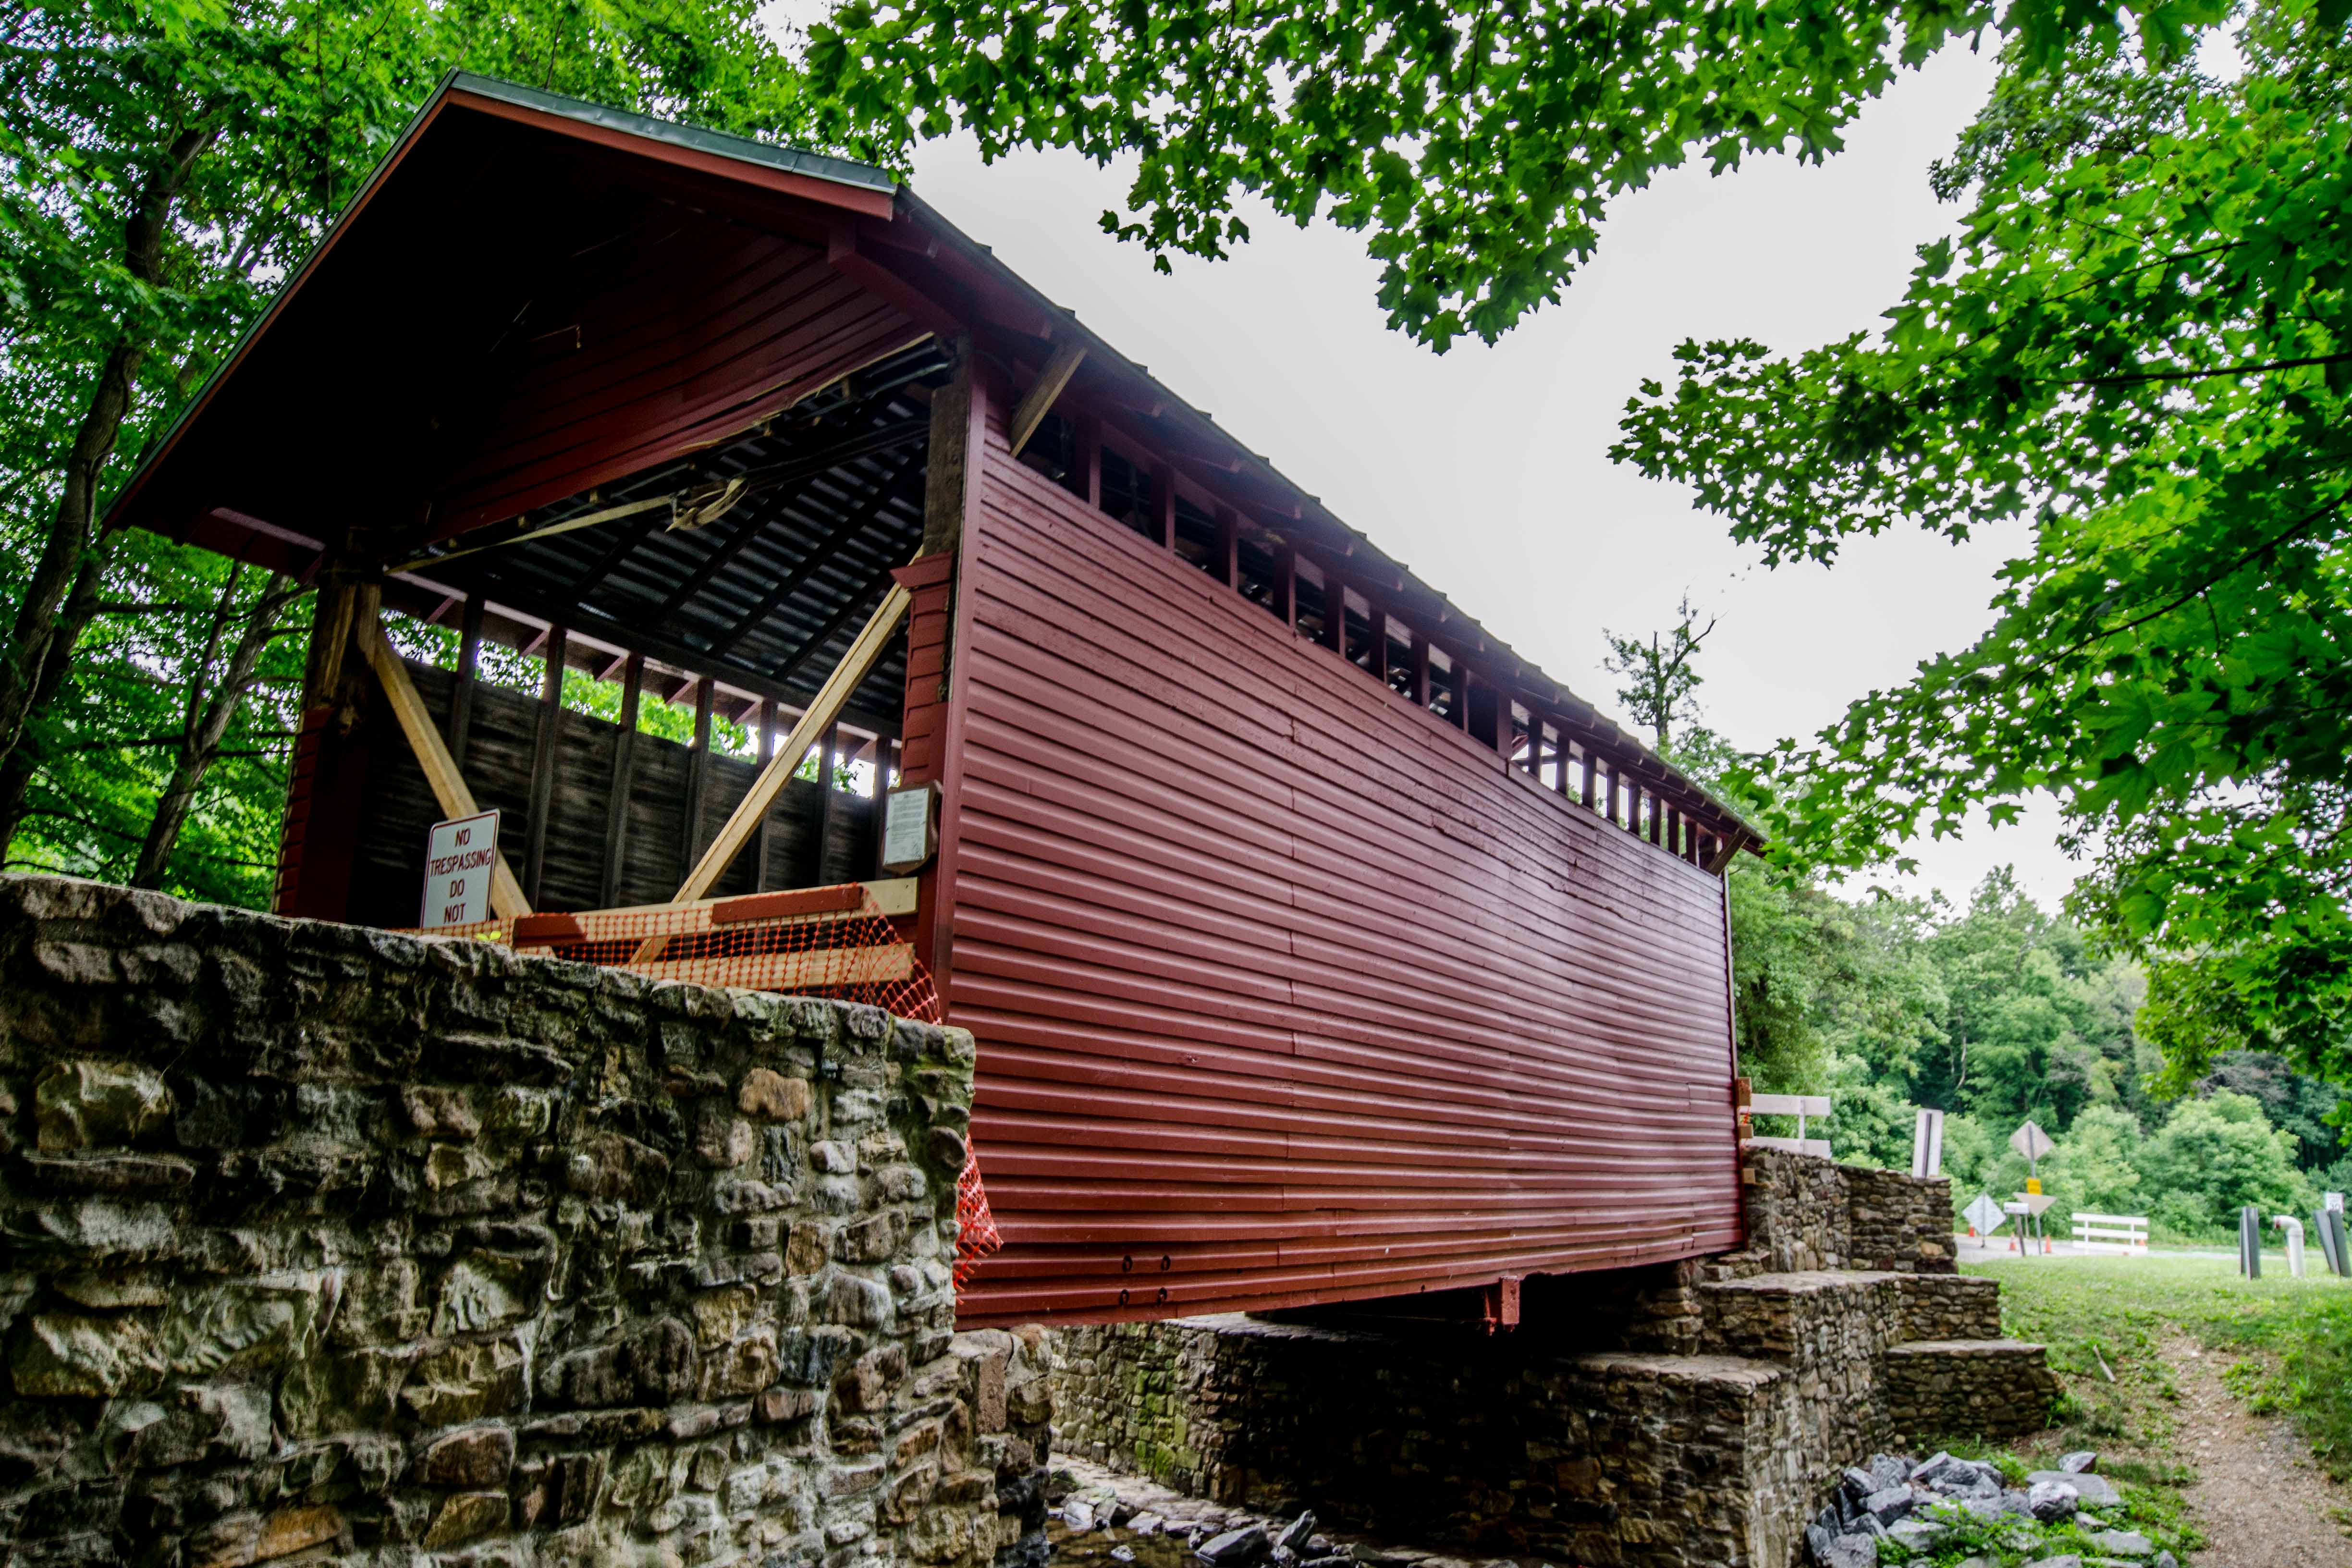 Roddy Road Covered Bridge, painted red, closed due to damage